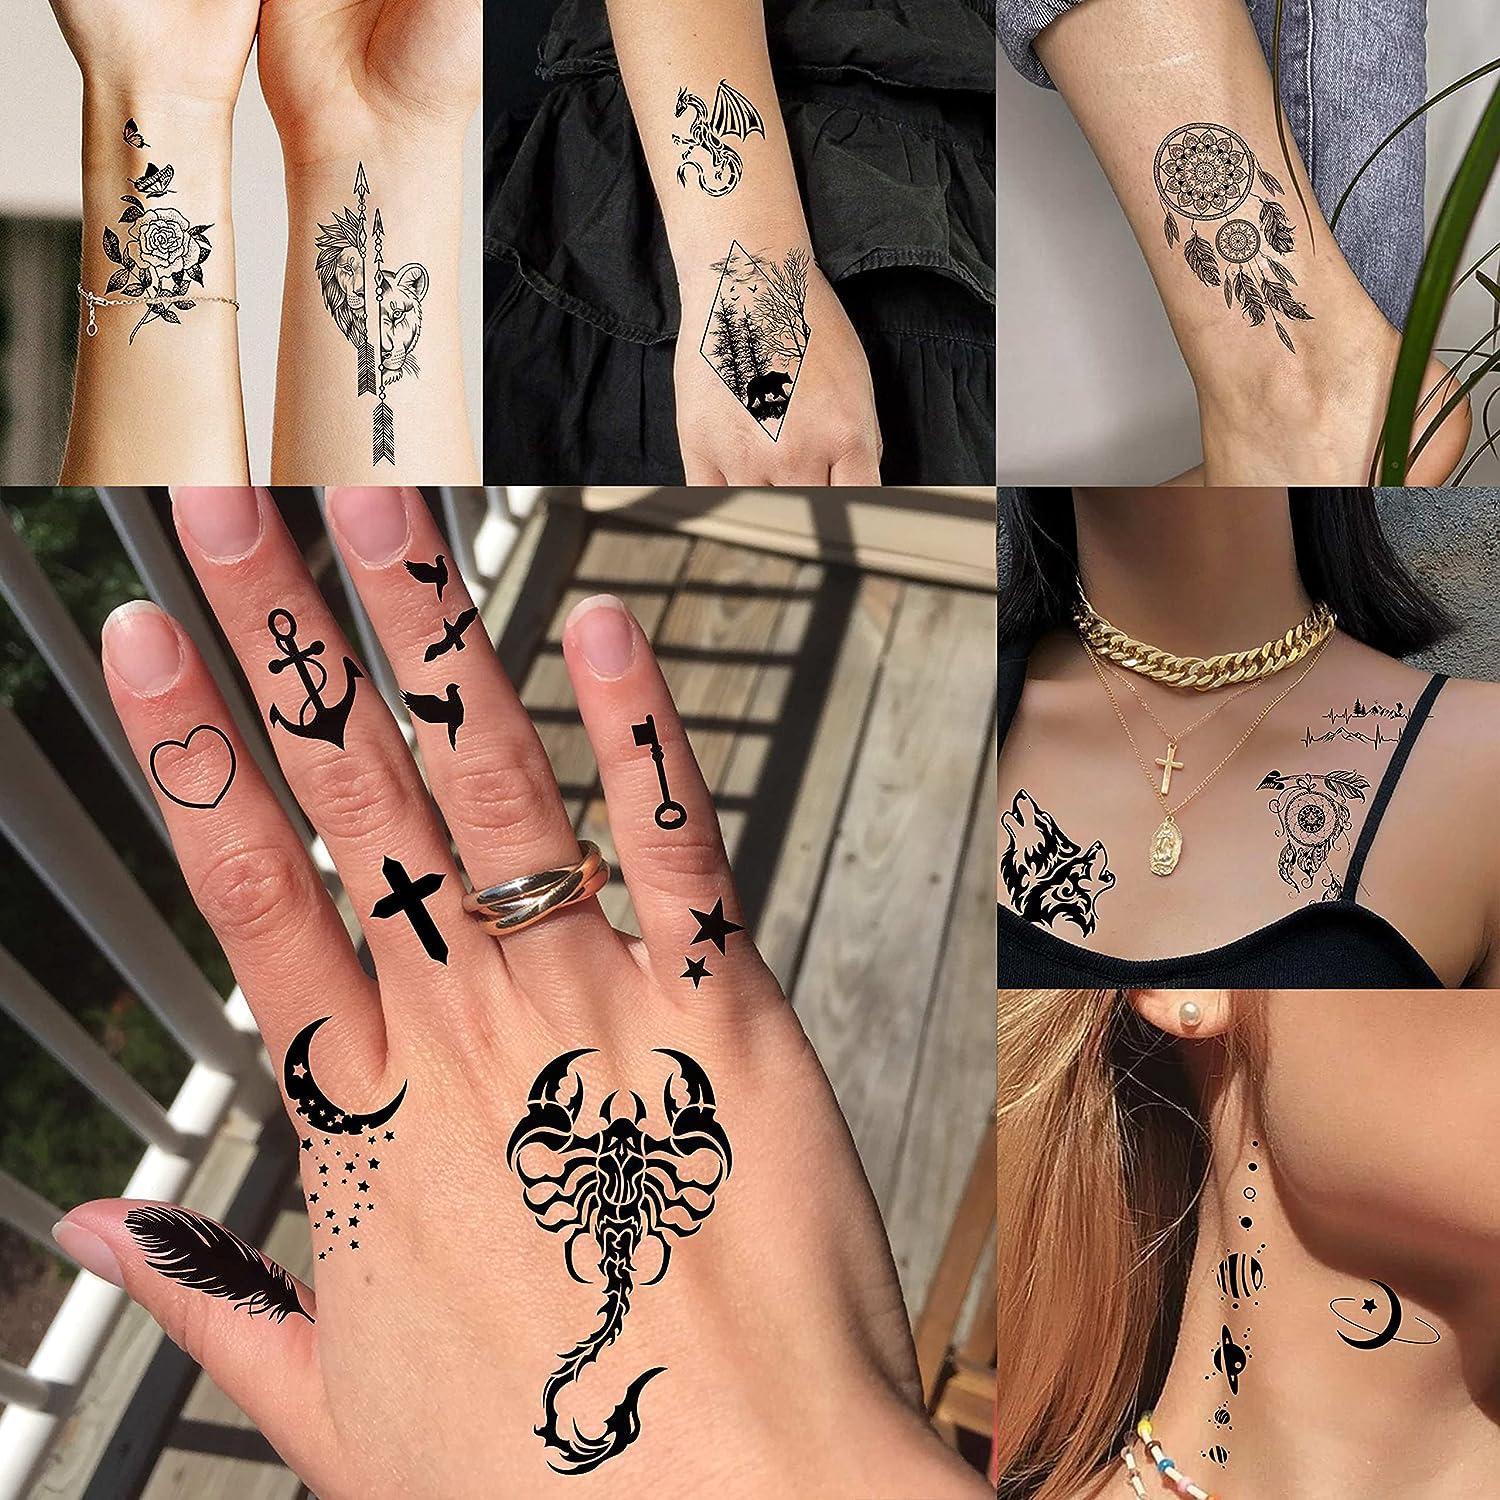 30 Small Finger Tattoos to Inspire You Before Tattoo Parlours Open Up Again  | Tiny finger tattoos, Hand and finger tattoos, Finger tattoos